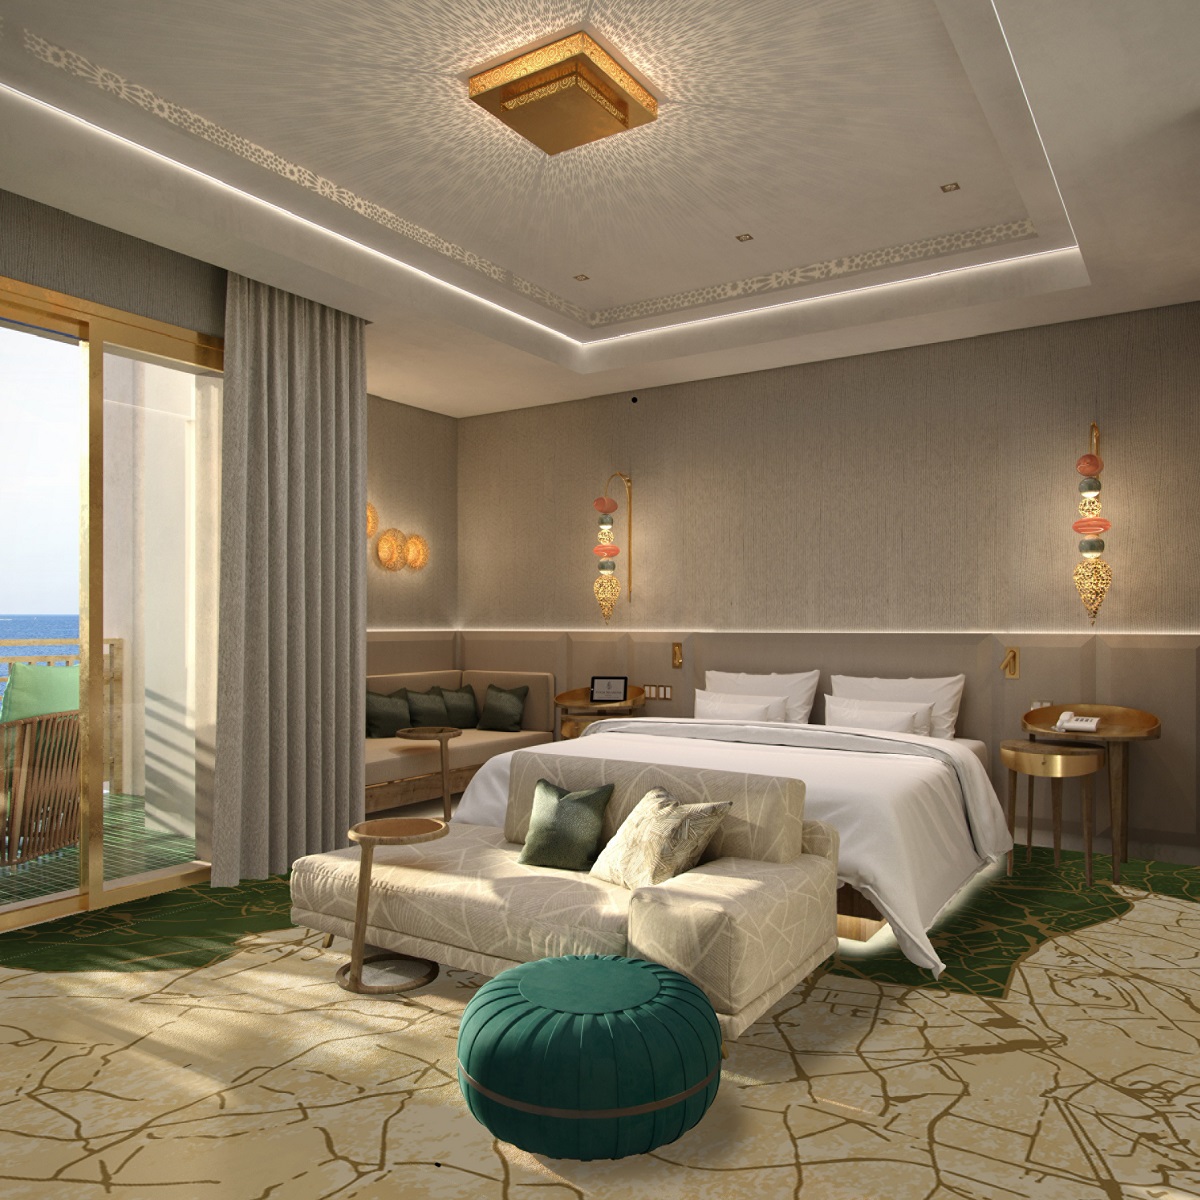 Four Seasons reimagines a Moroccan palace • Hotel Designs